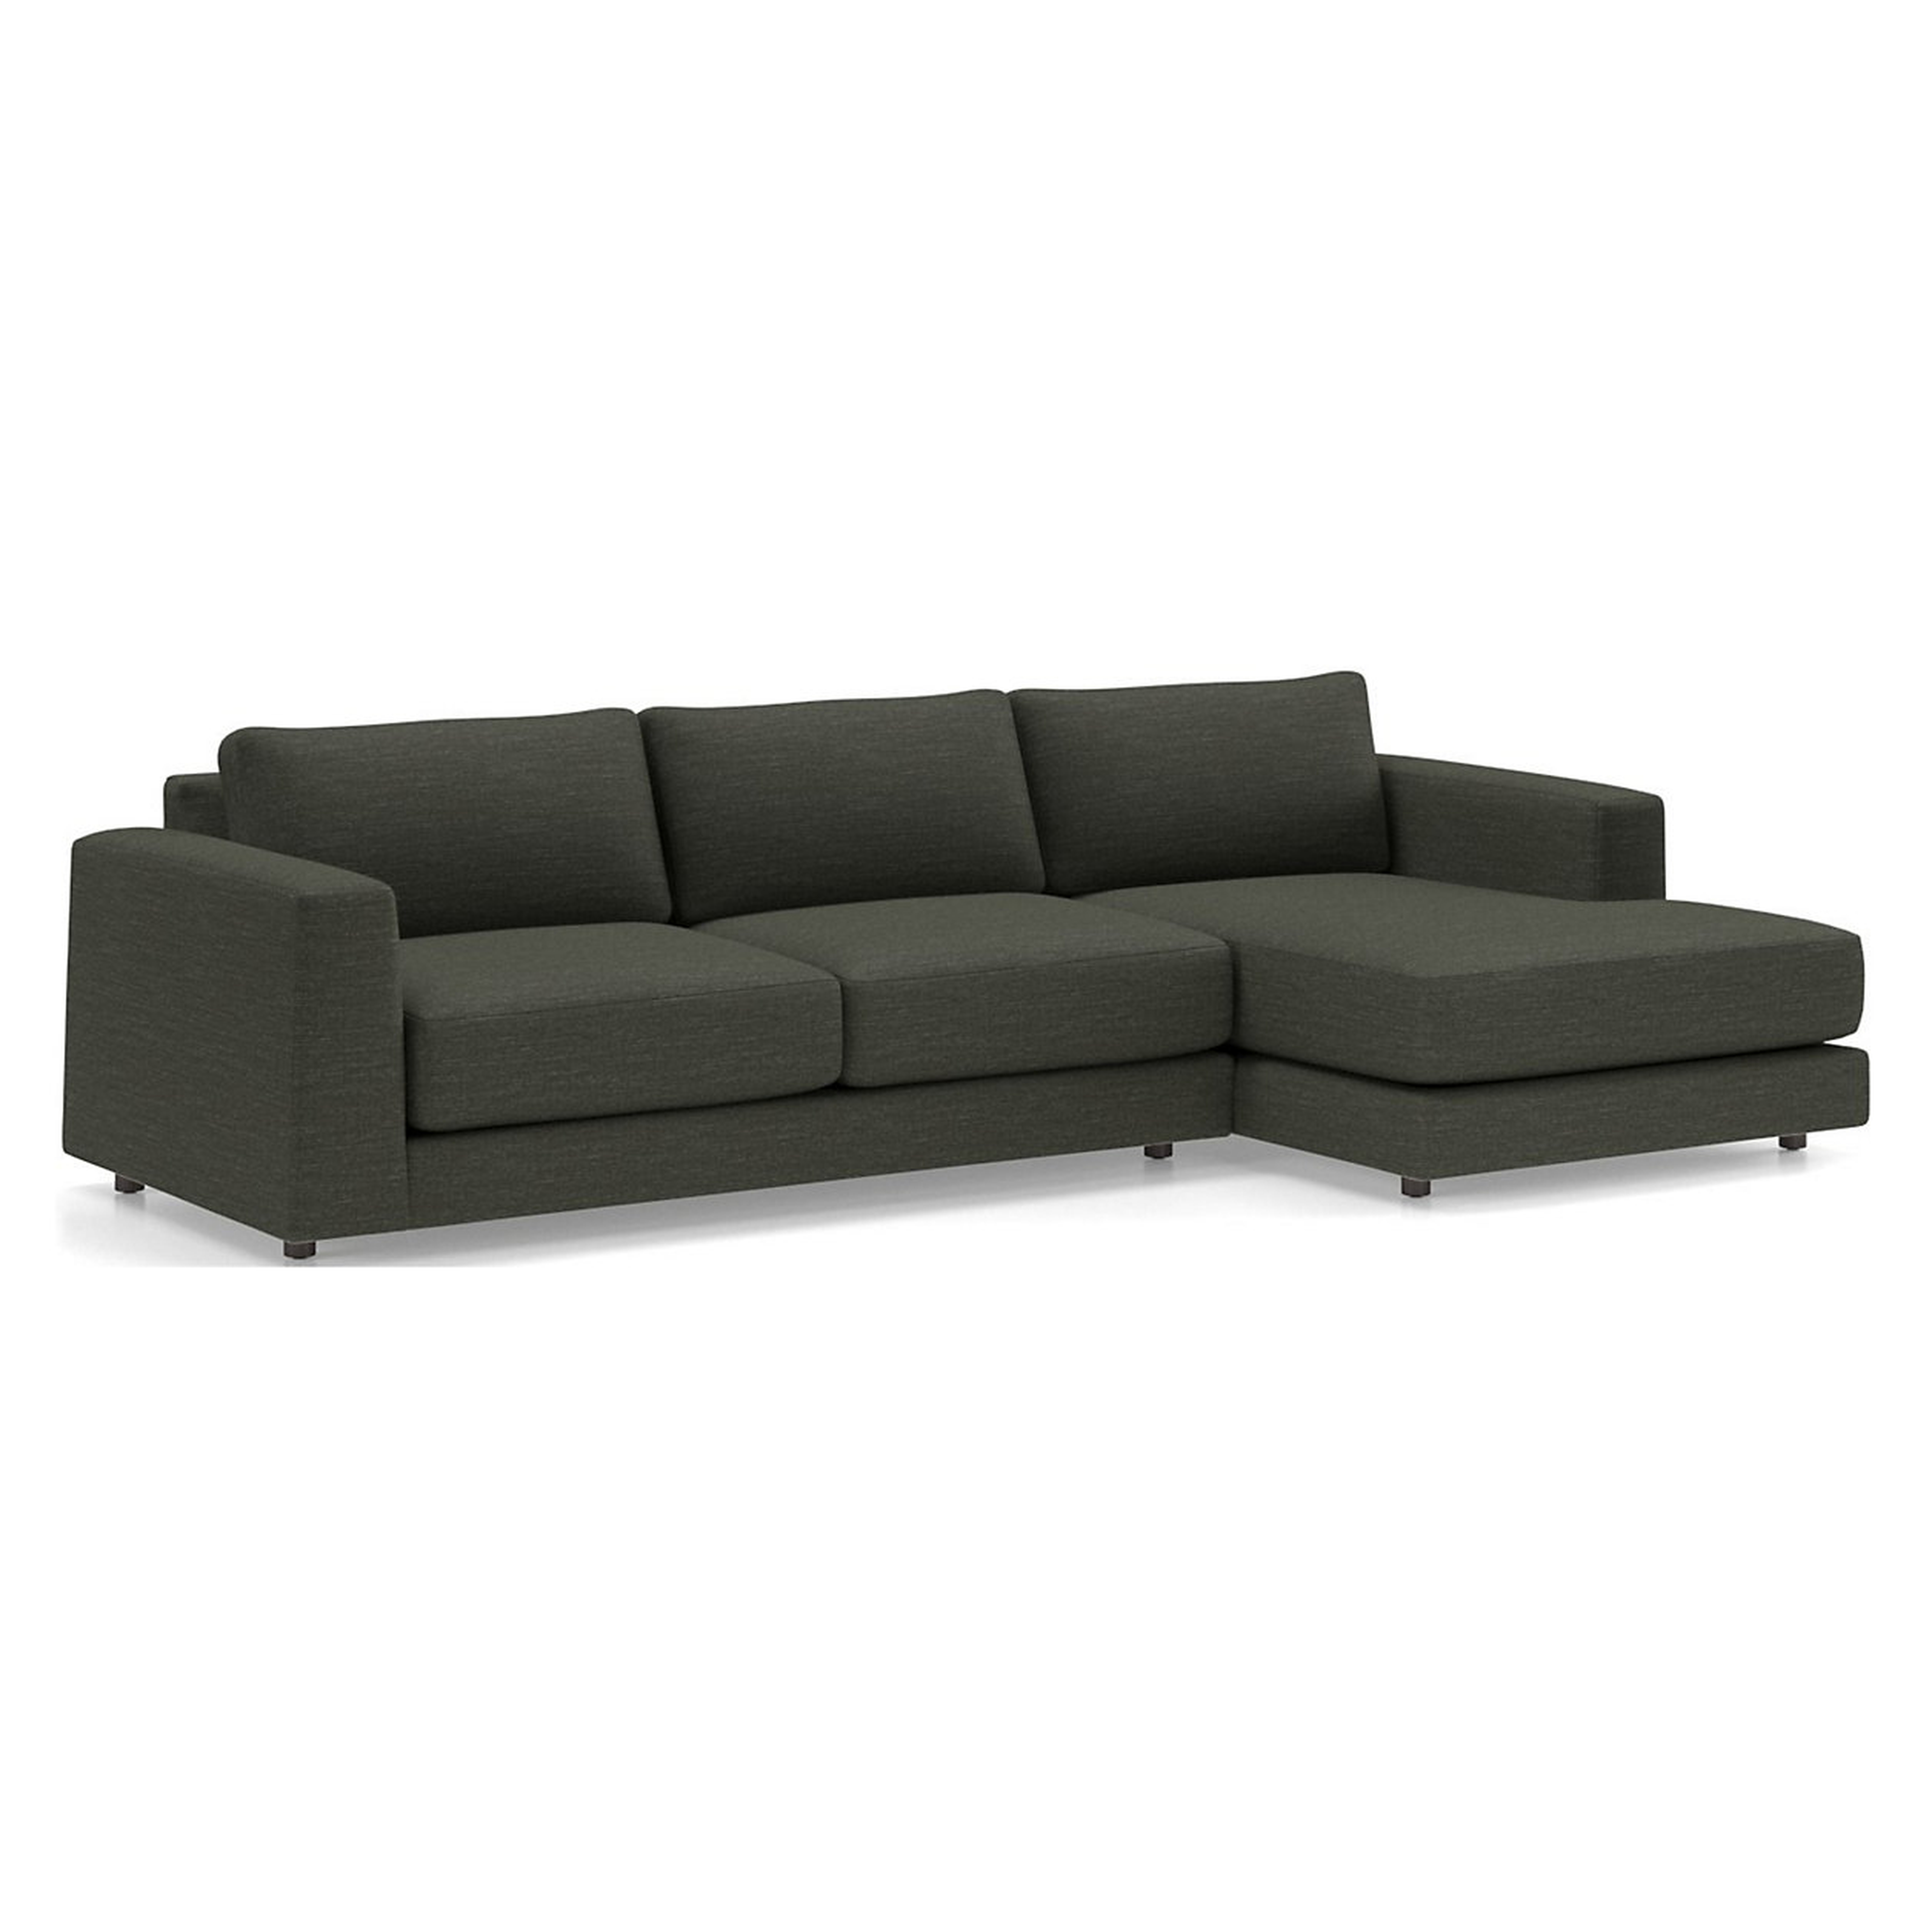 Peyton 2-Piece Sectional - Crate and Barrel